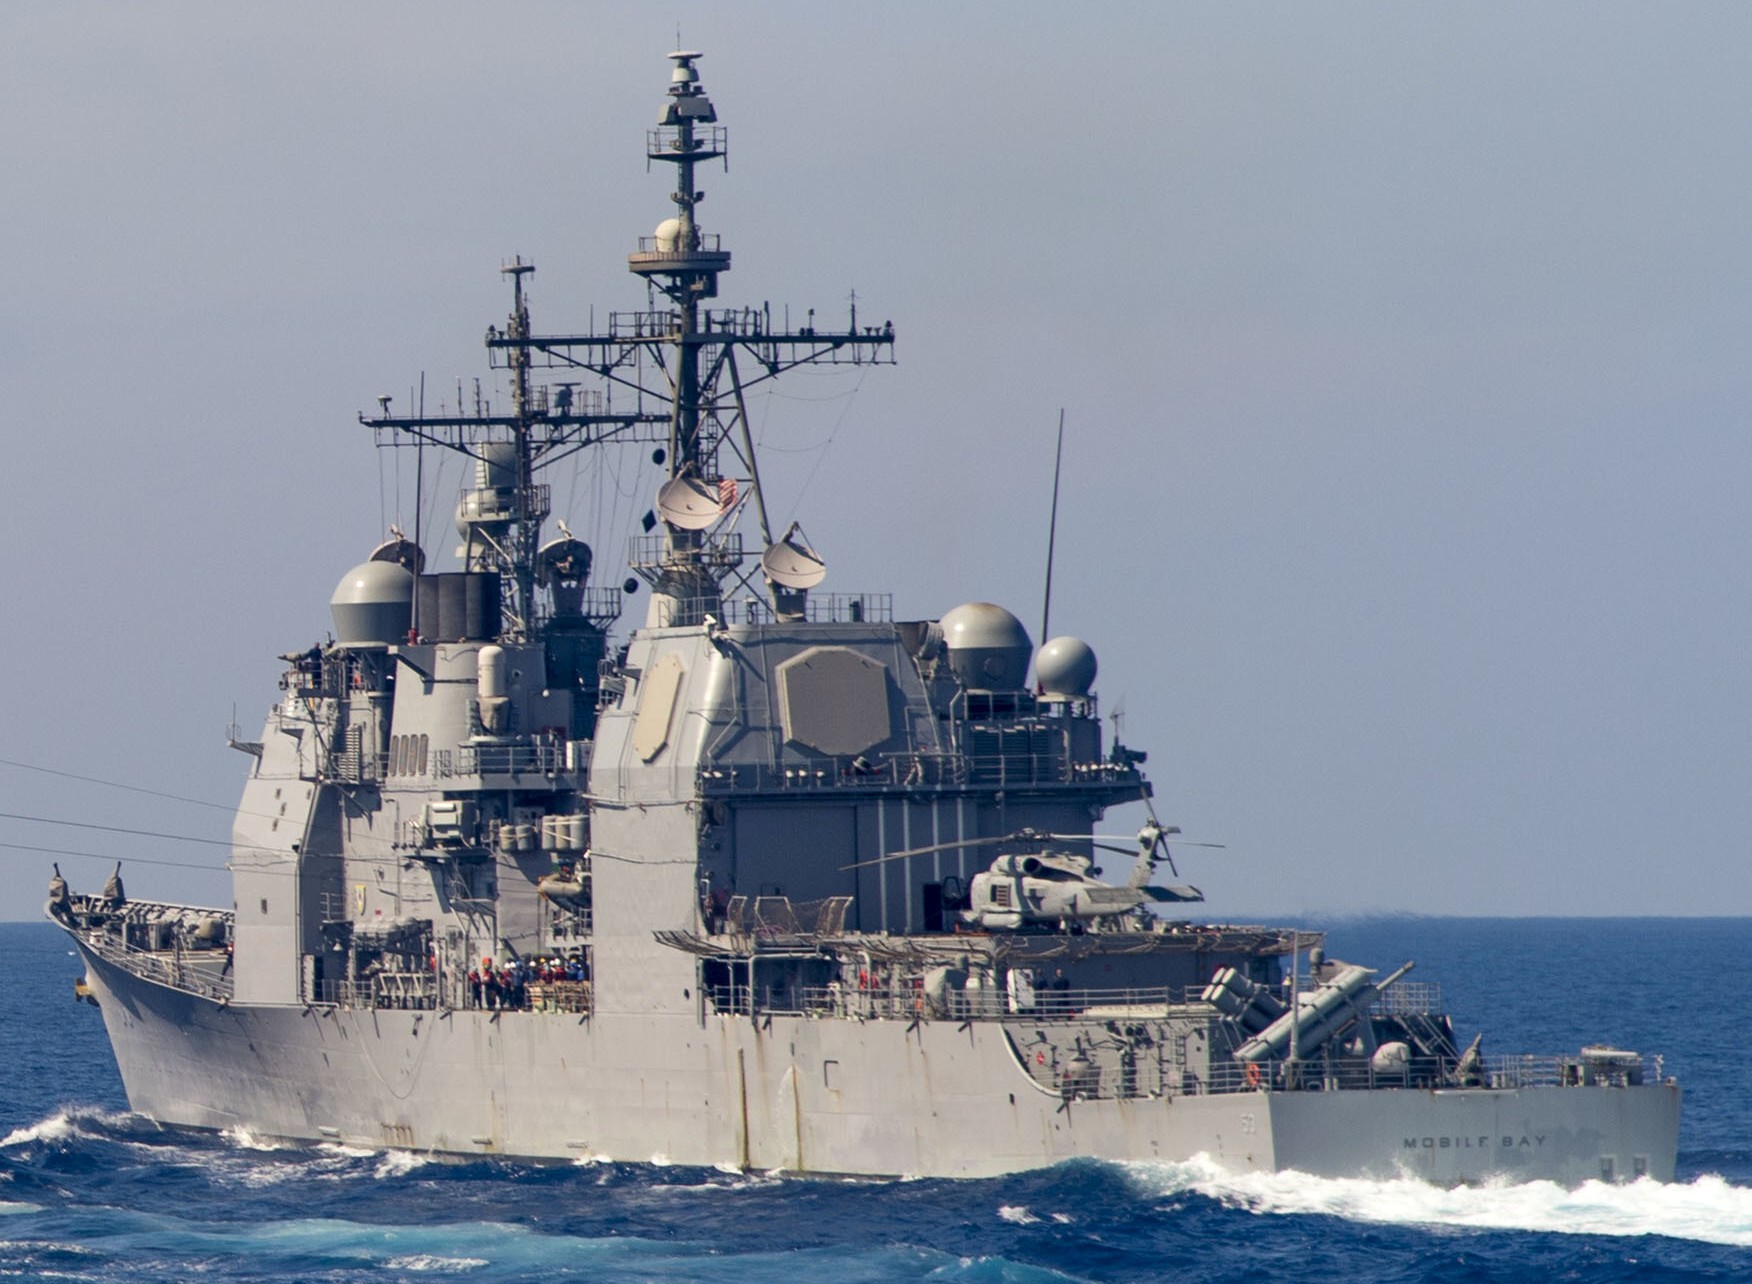 cg-53 uss mobile bay ticonderoga class guided missile cruiser aegis us navy 92